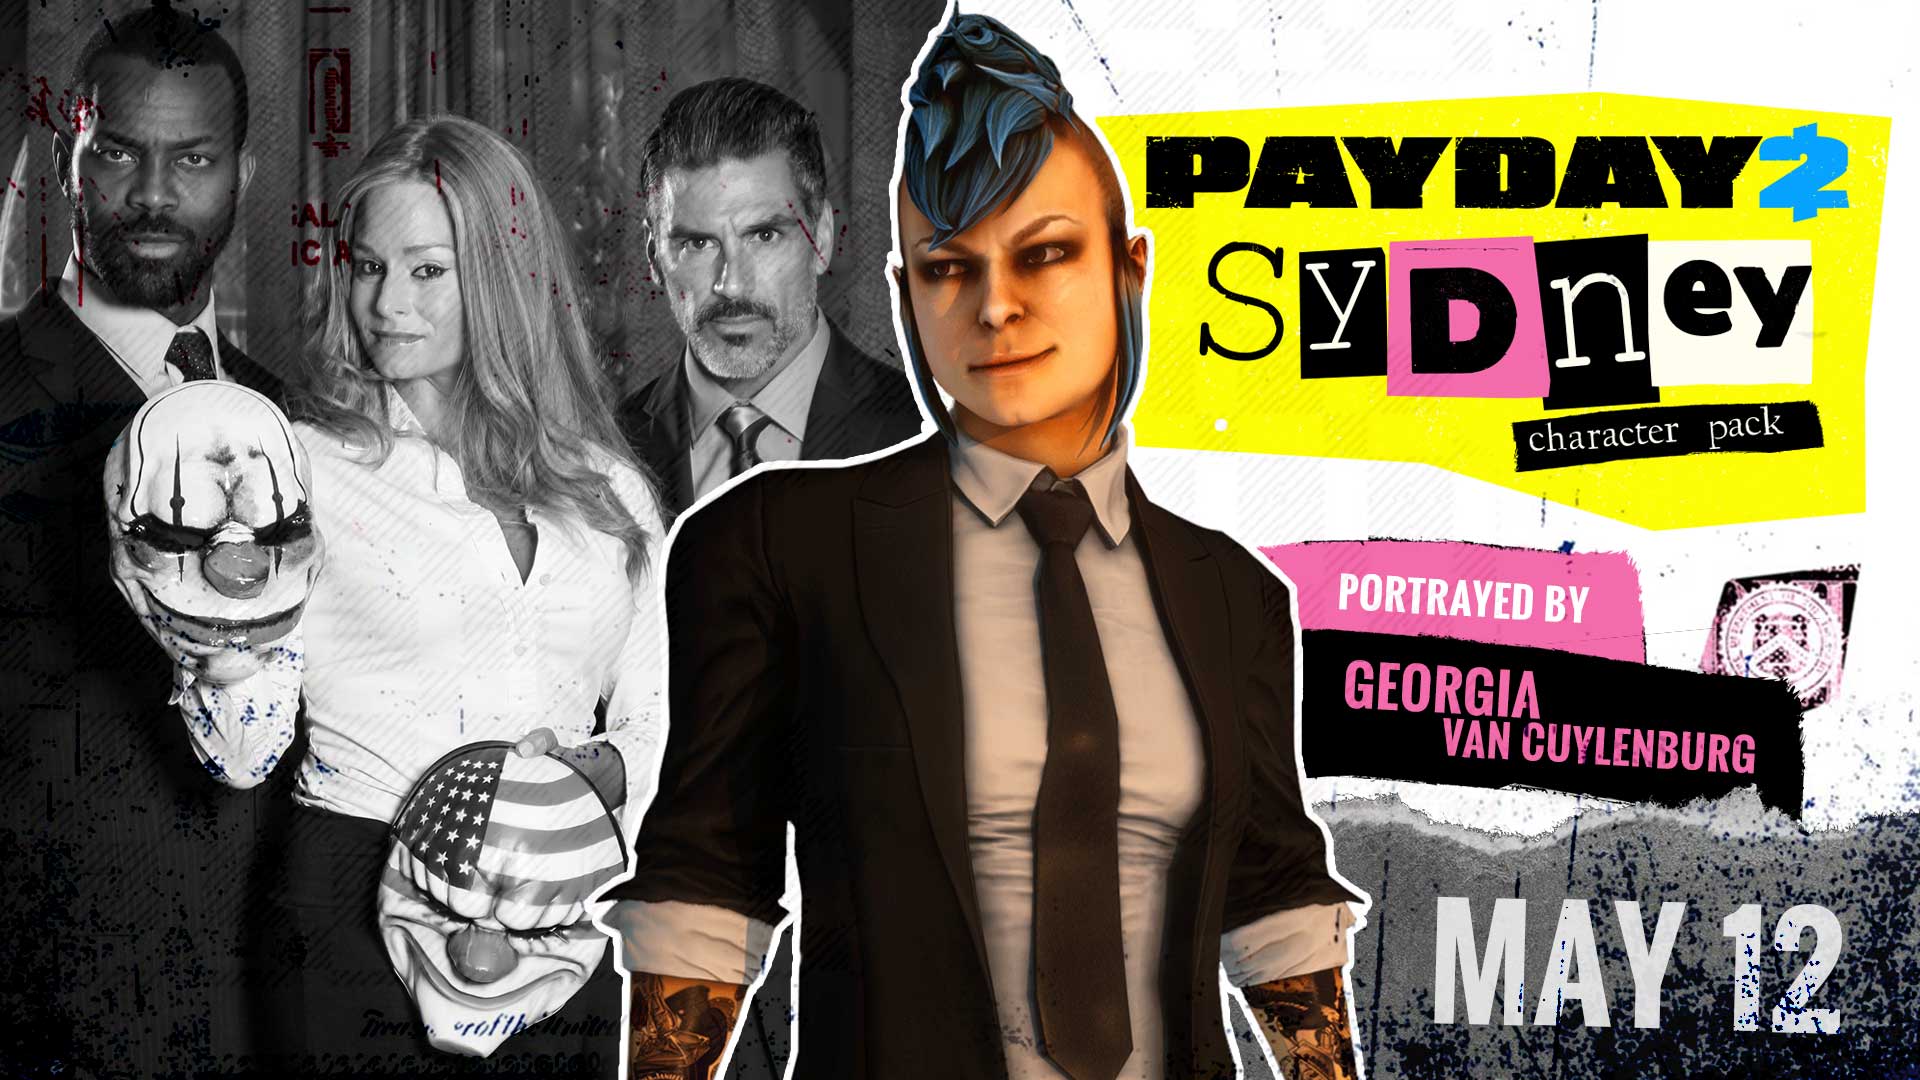 Sydney character pack payday 2 фото 16